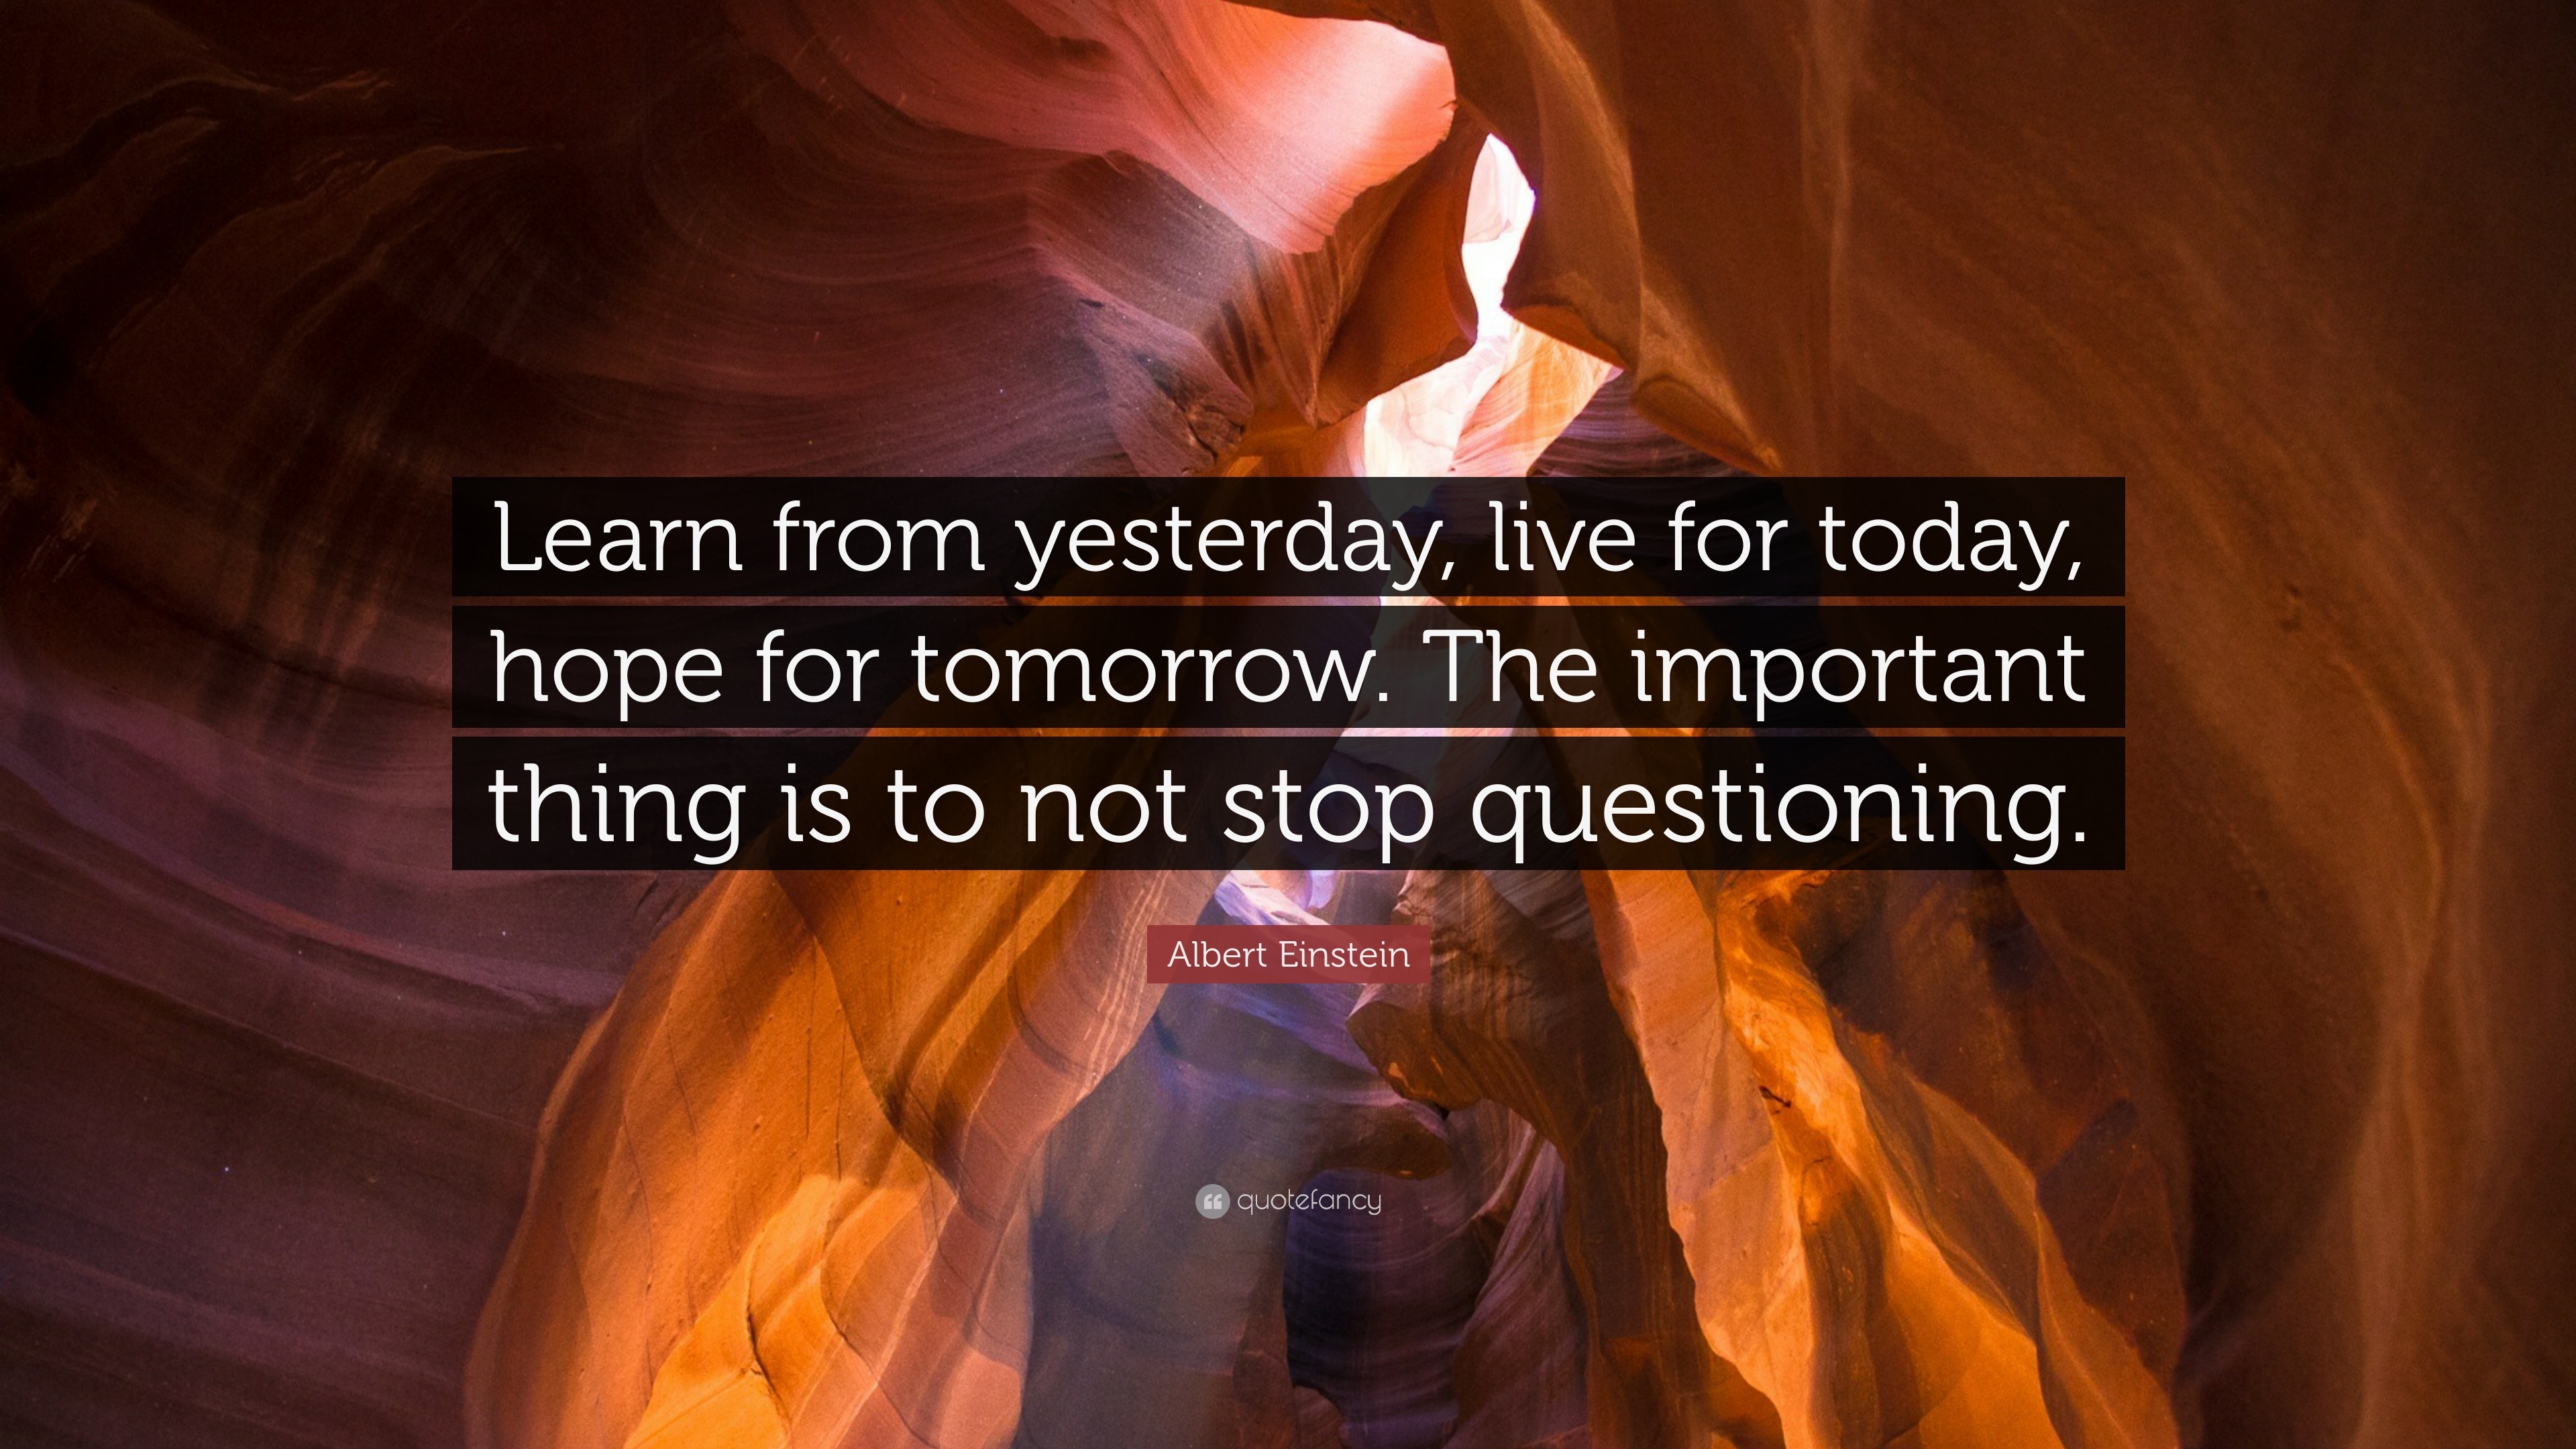 learn from yesterday live for today hope for tomorrow essay